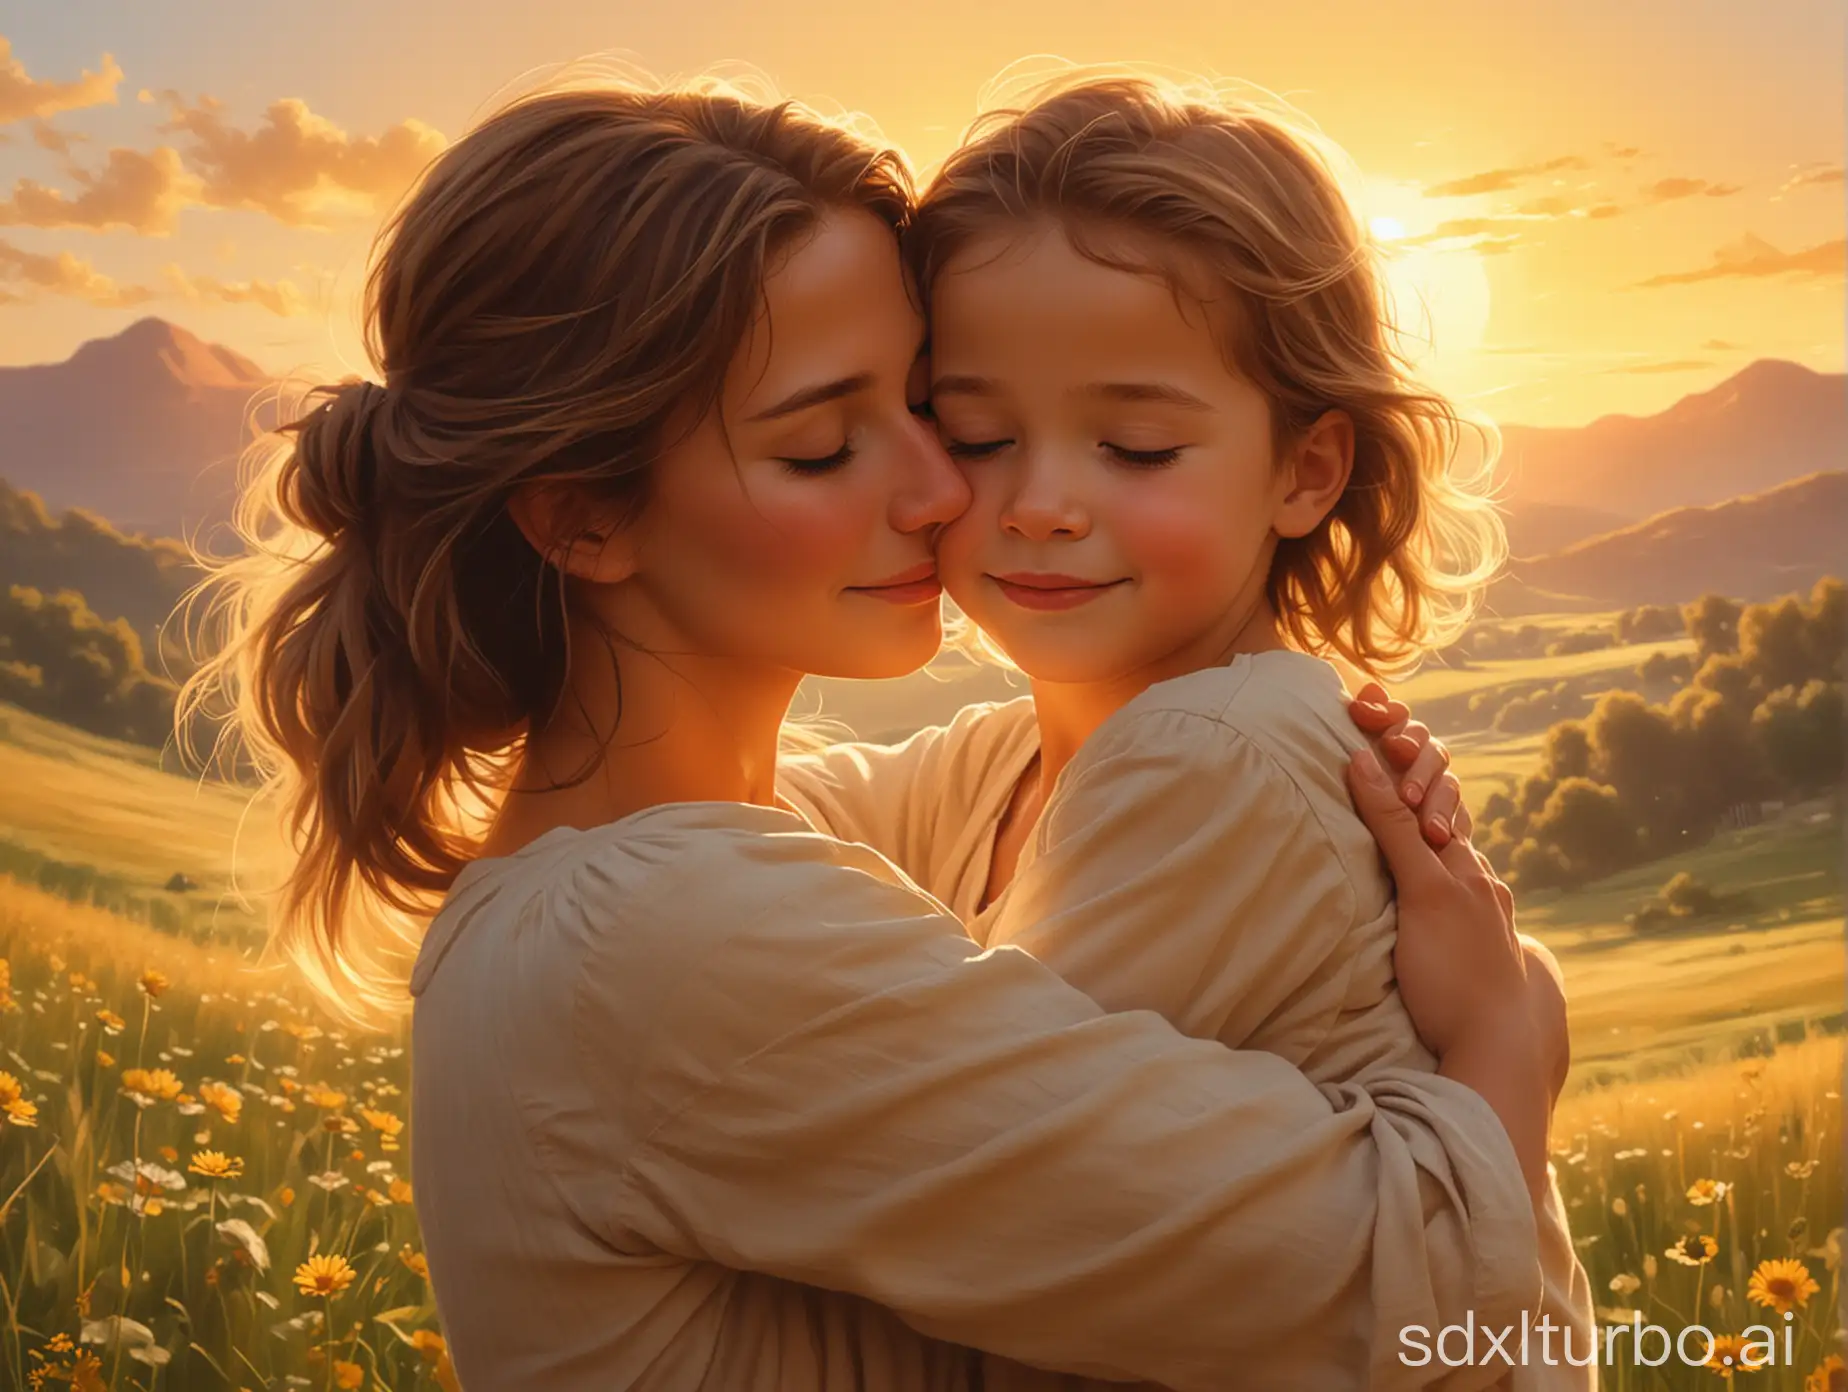 A heartwarming illustration of a mother and her child embracing tenderly, their faces filled with love and warmth. The mother, with gentle  eyes and a soft smile, holds her child close, while the child, with a sweet grin, wraps their arms around her neck. The background showcases a serene natural landscape, with a golden sun setting over a vast meadow, giving off a warm, golden glow. The scene exudes a timeless quality, capturing the enduring bond and the unconditional love between a mother and her child., illustration